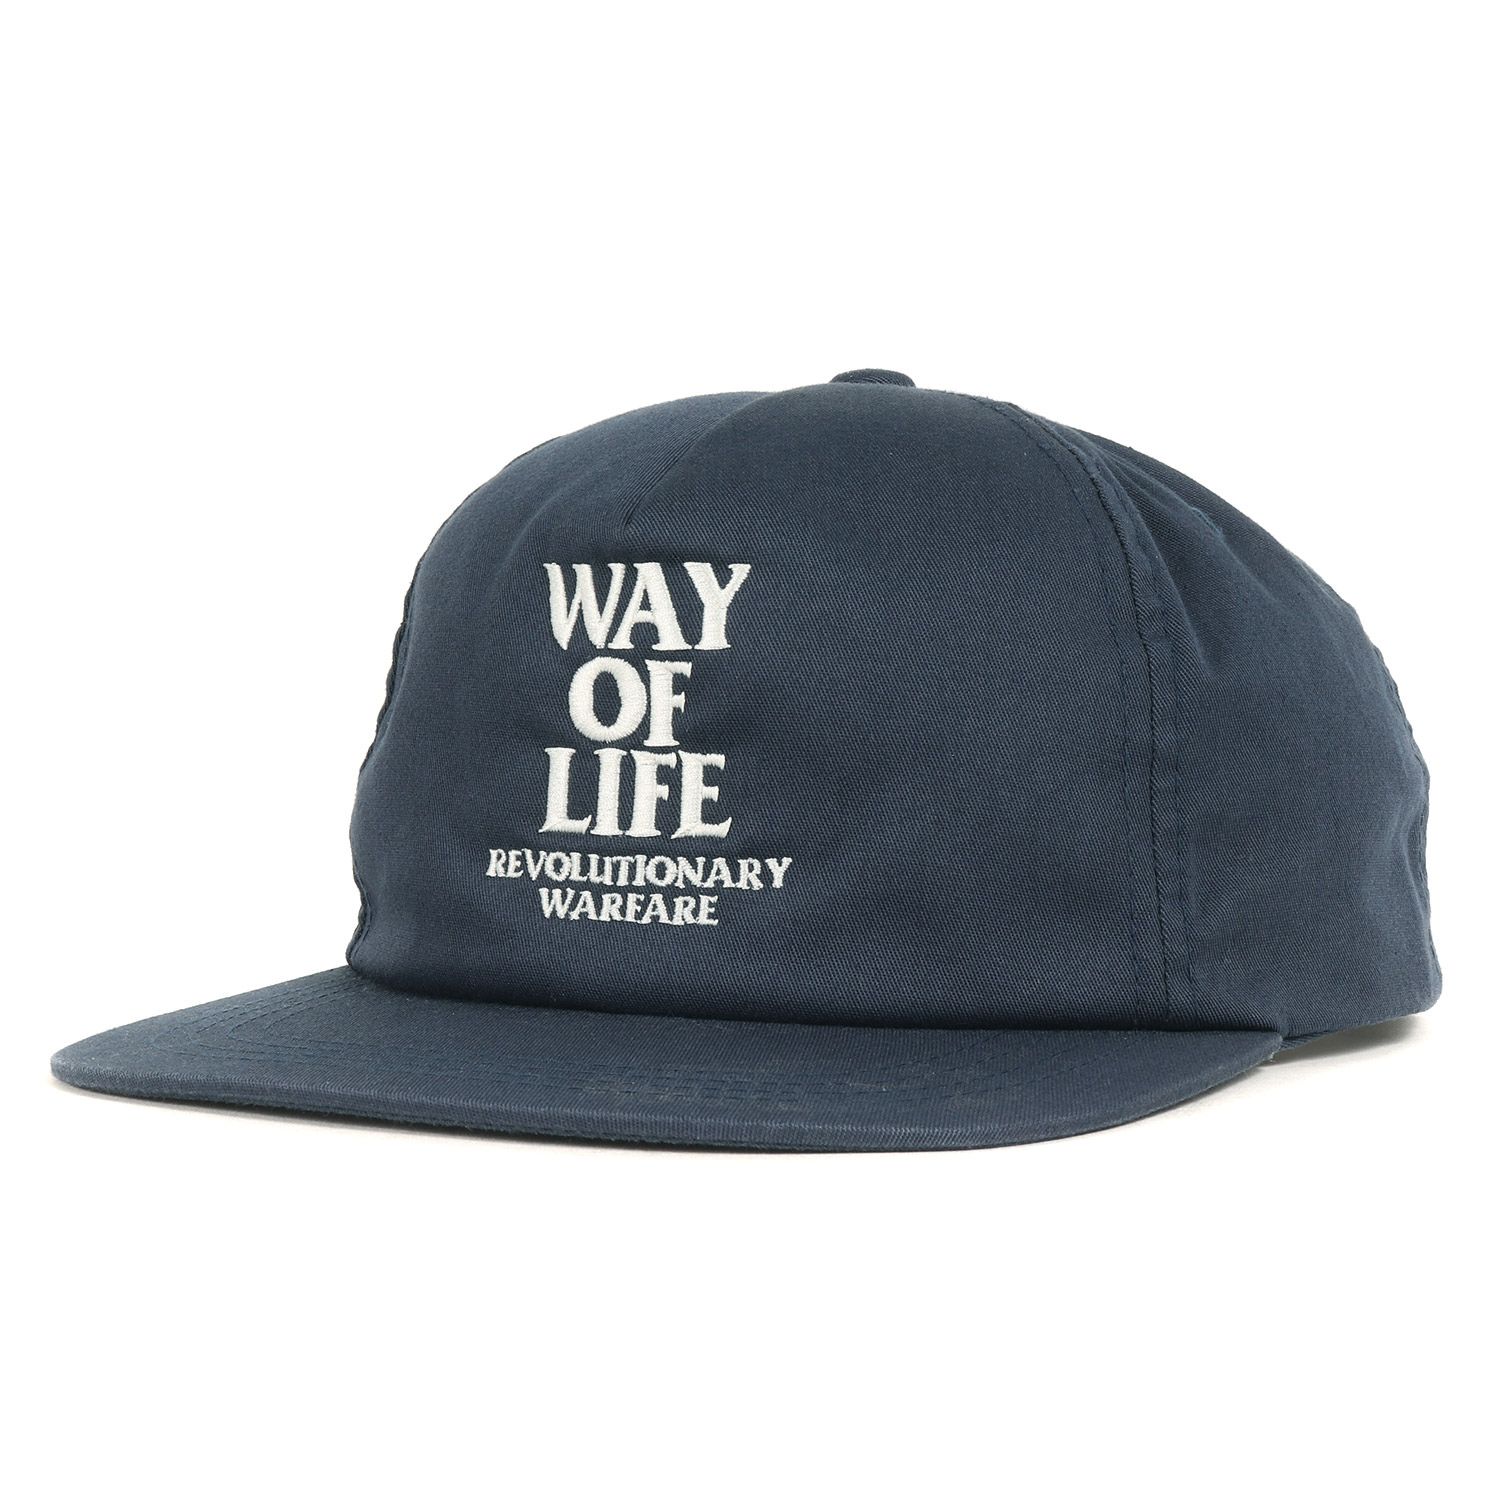 RATS ラッツ キャップ 21SS WAY OF LIFE 5パネル キャップ EMBROIDERY ...